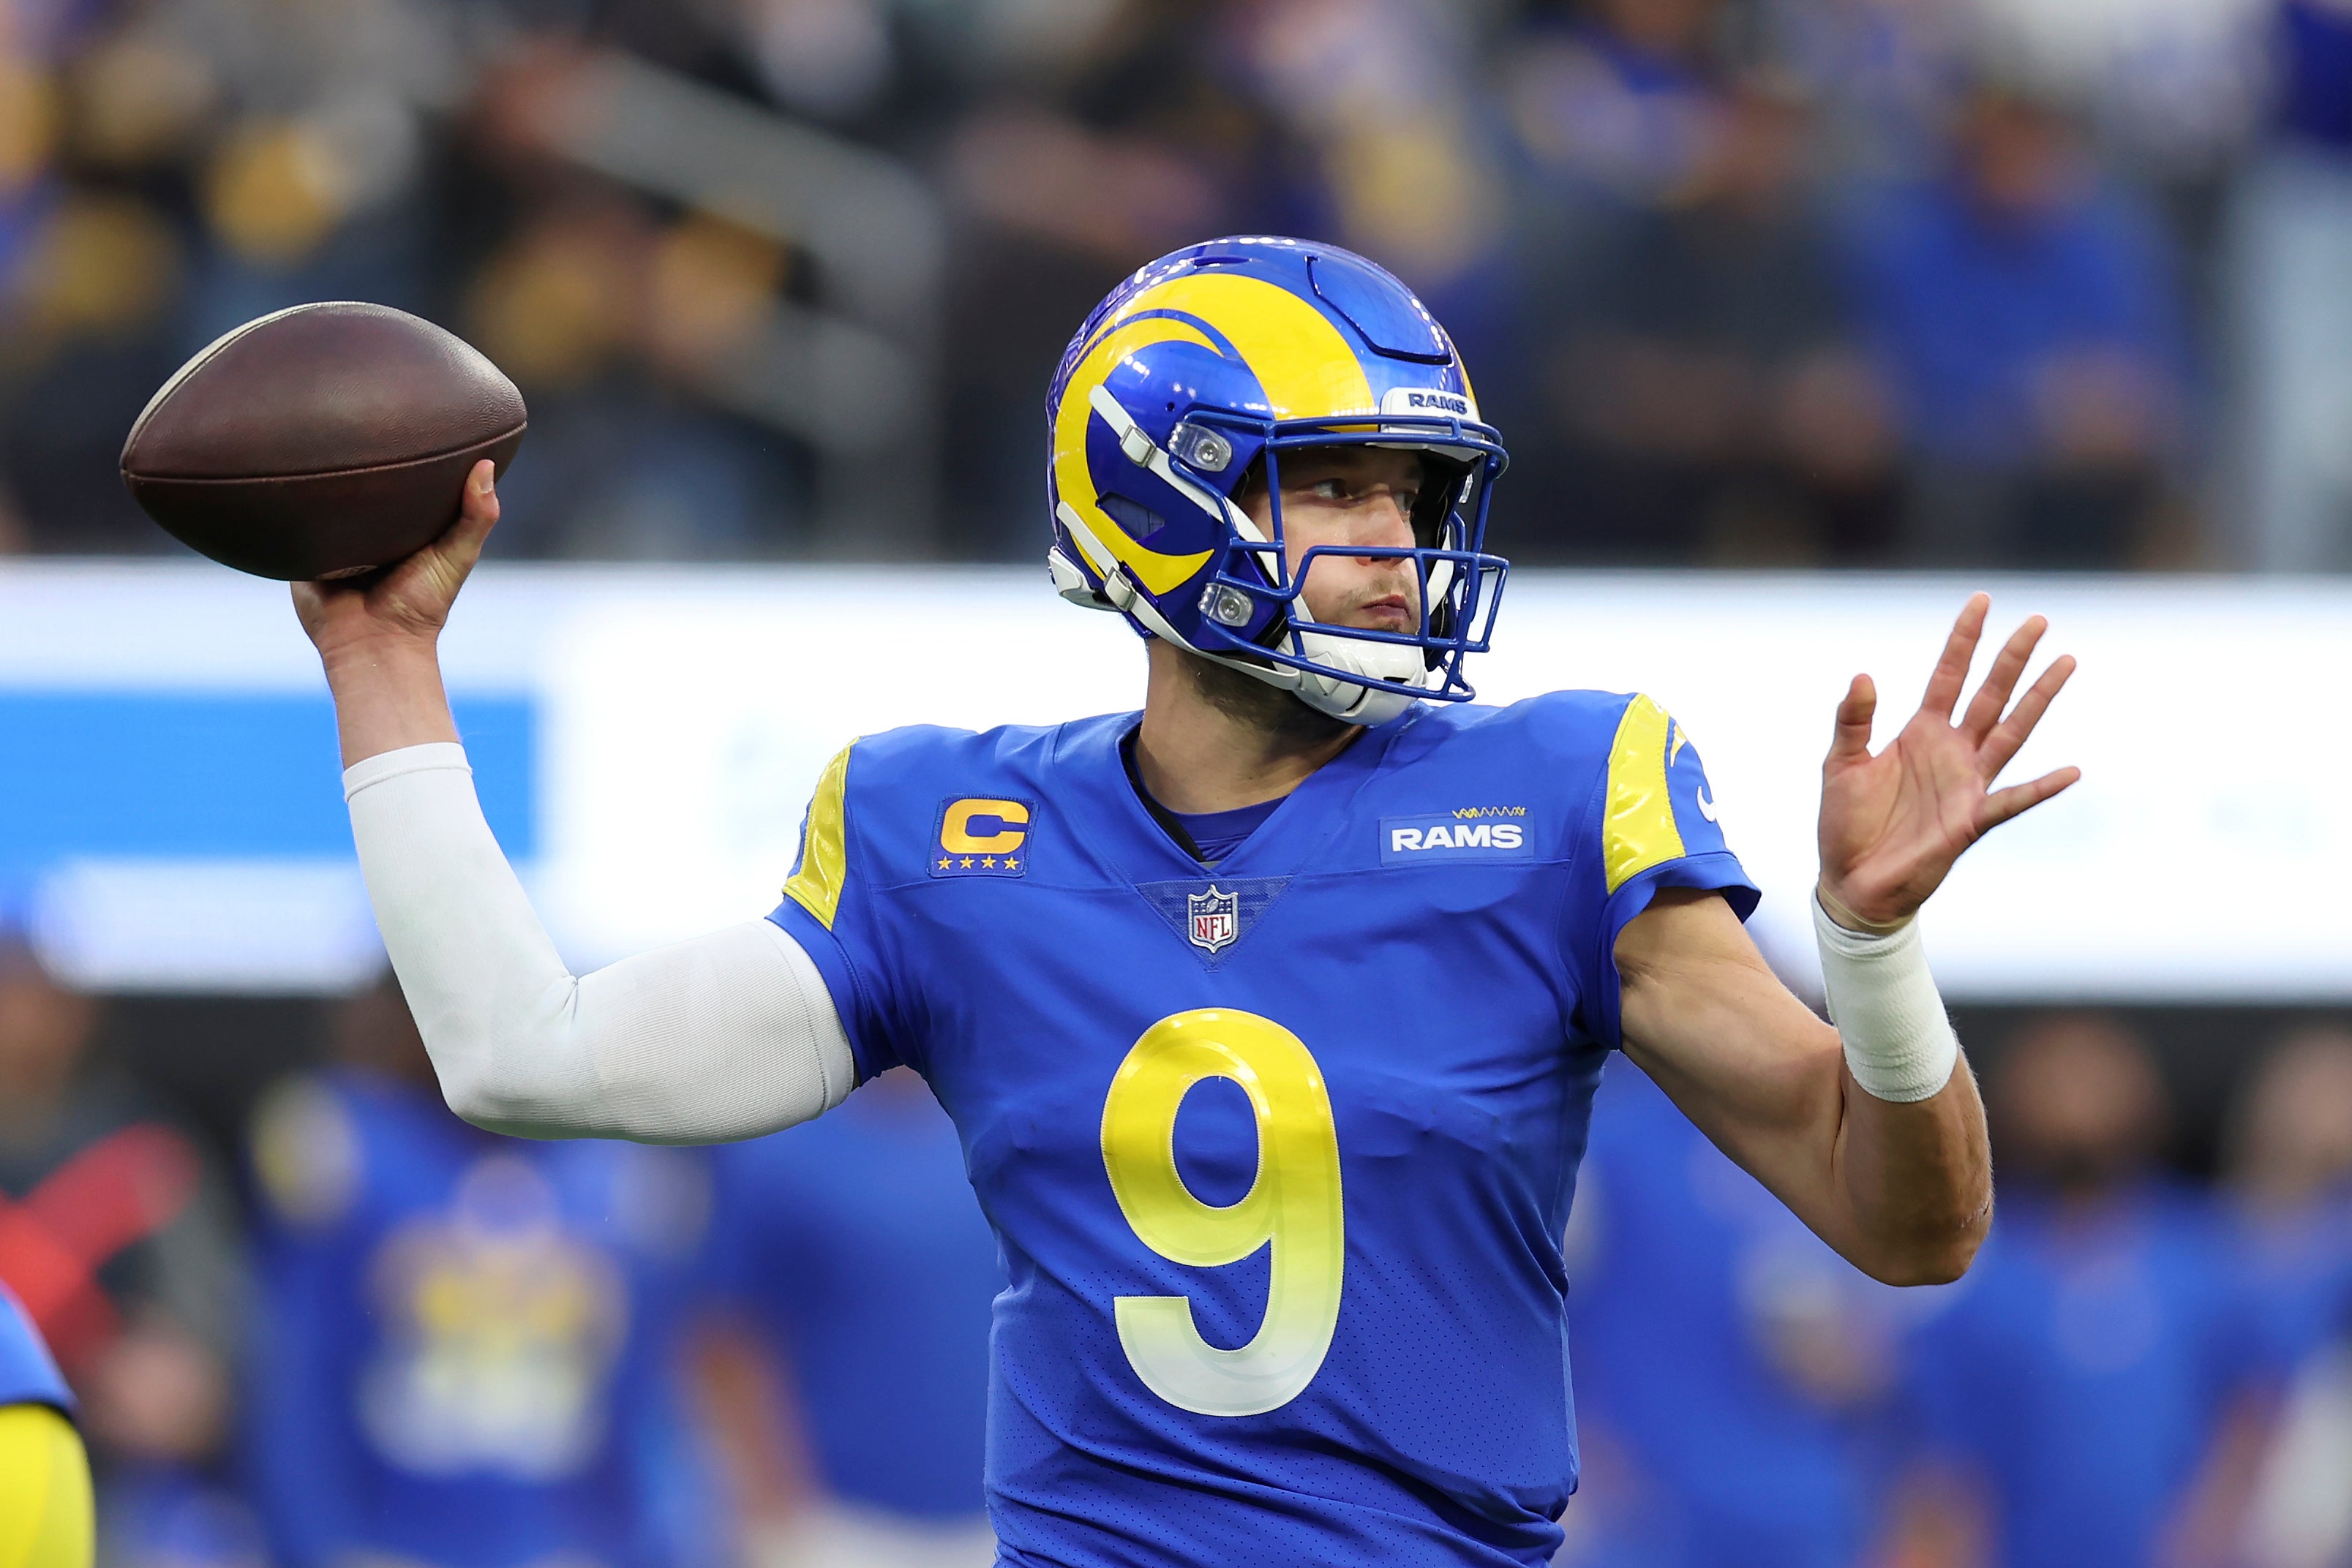 Matthew Stafford has guided the Rams to the Super Bowl (Jed Jacobsohn/AP)